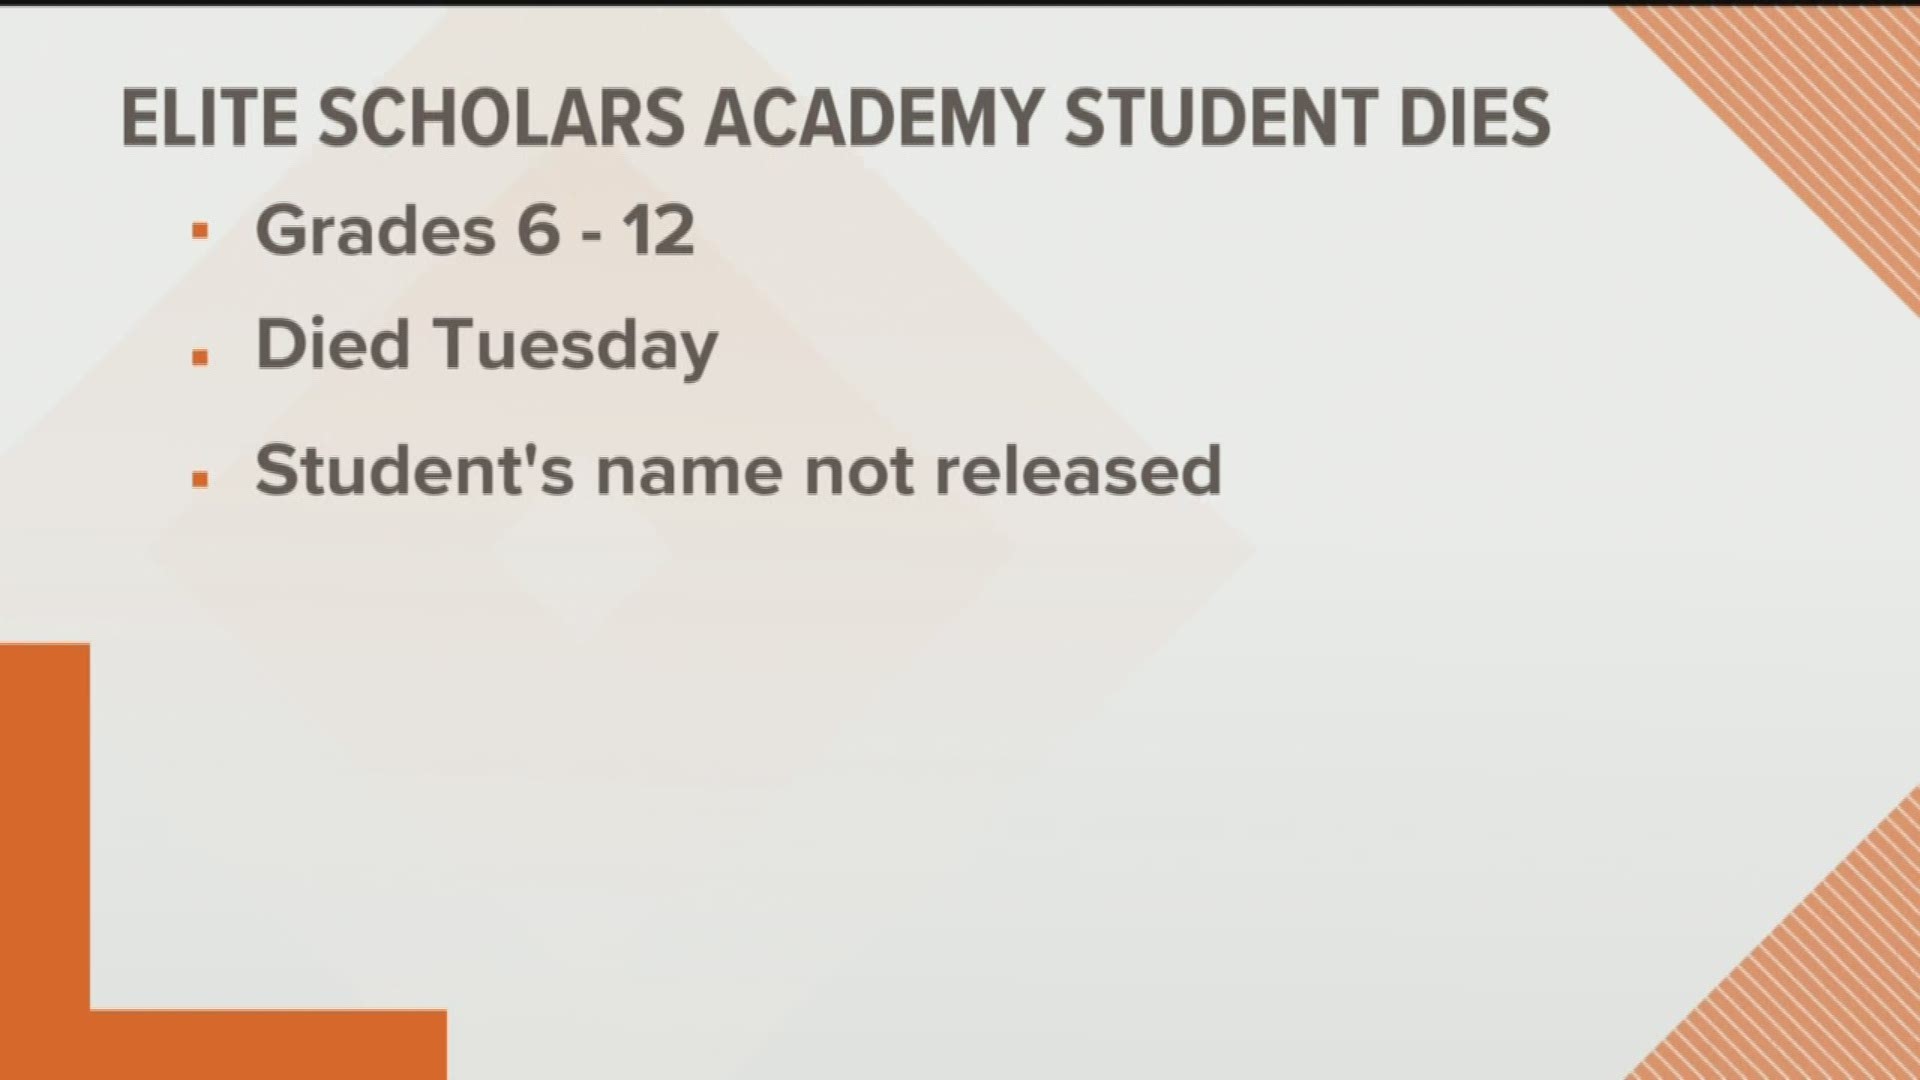 The student attended Elite Scholars Academy.